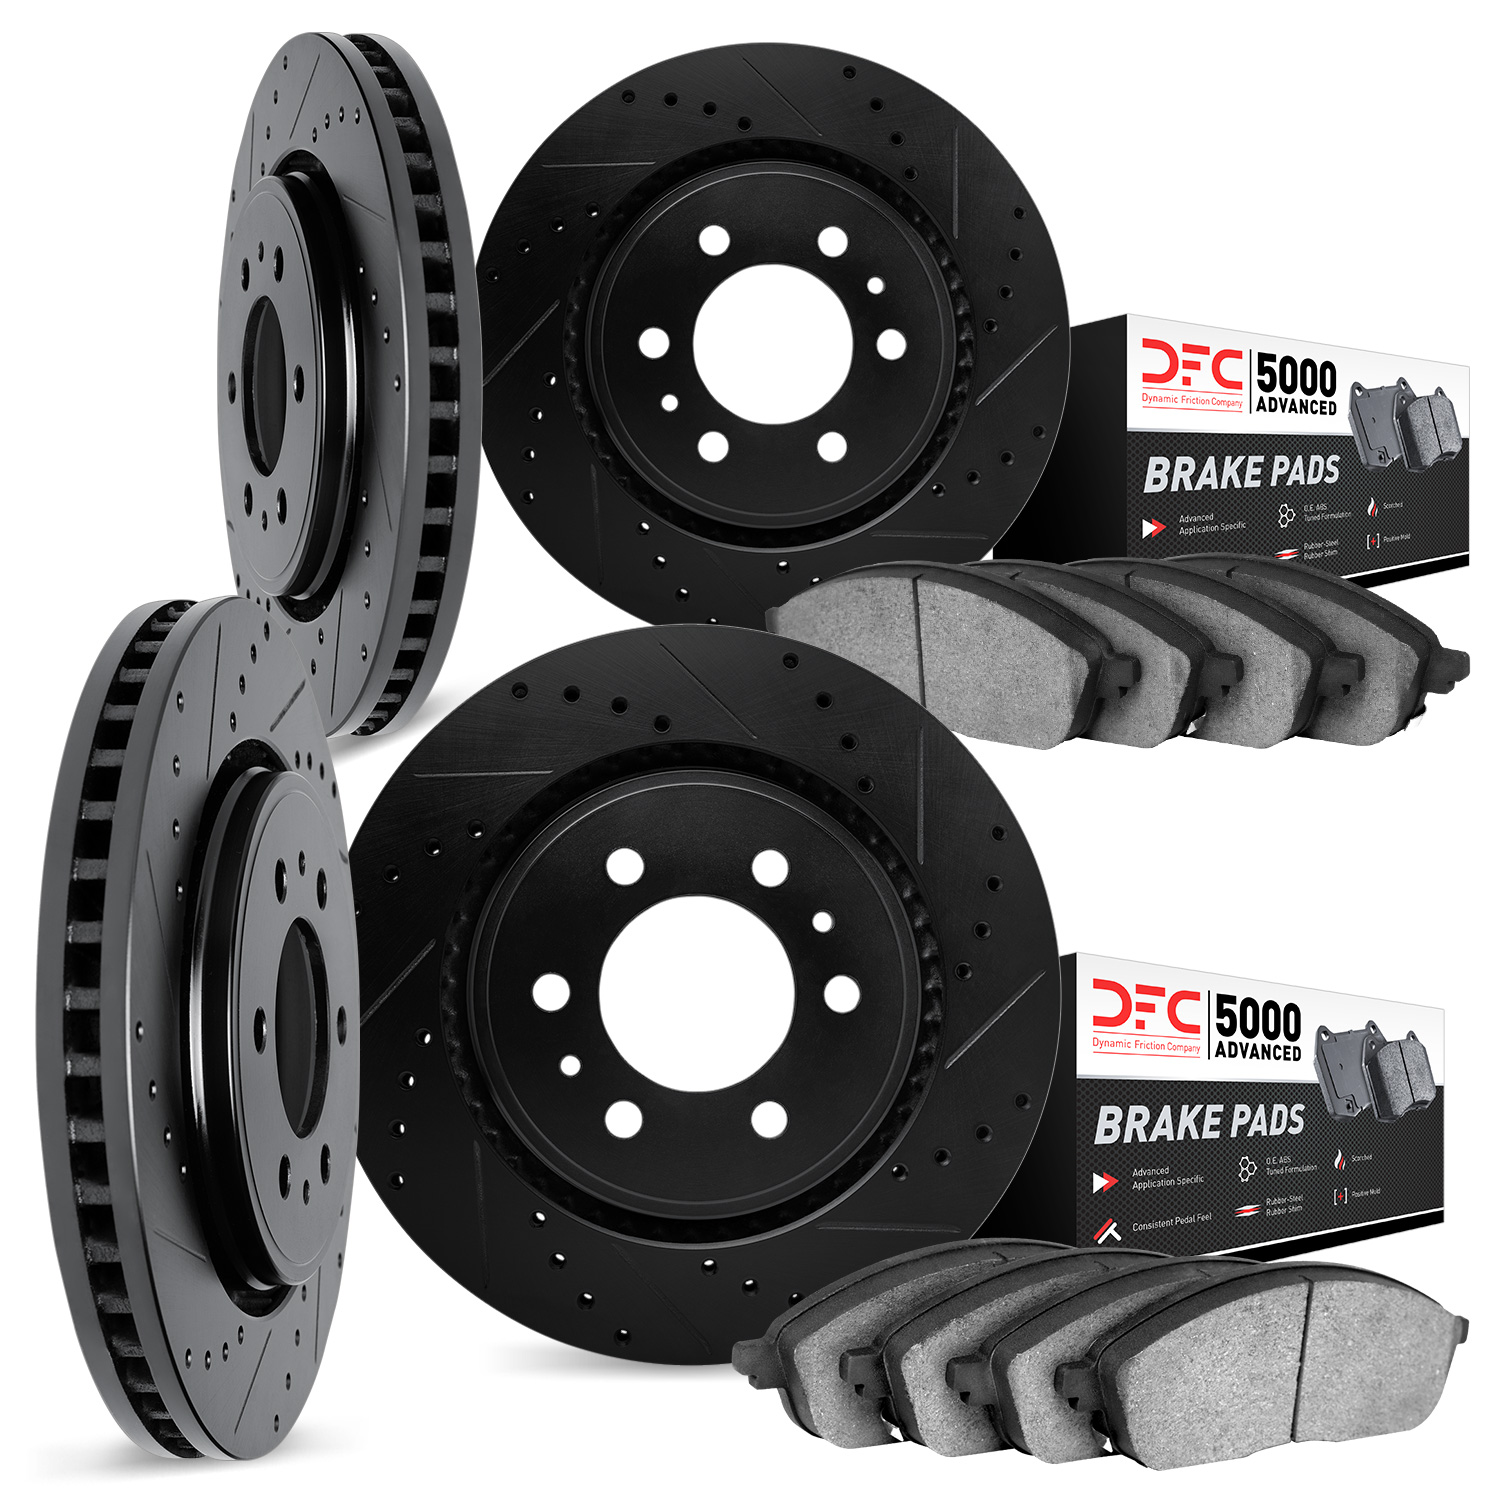 8504-46032 Drilled/Slotted Brake Rotors w/5000 Advanced Brake Pads Kit [Black], 2013-2019 GM, Position: Front and Rear